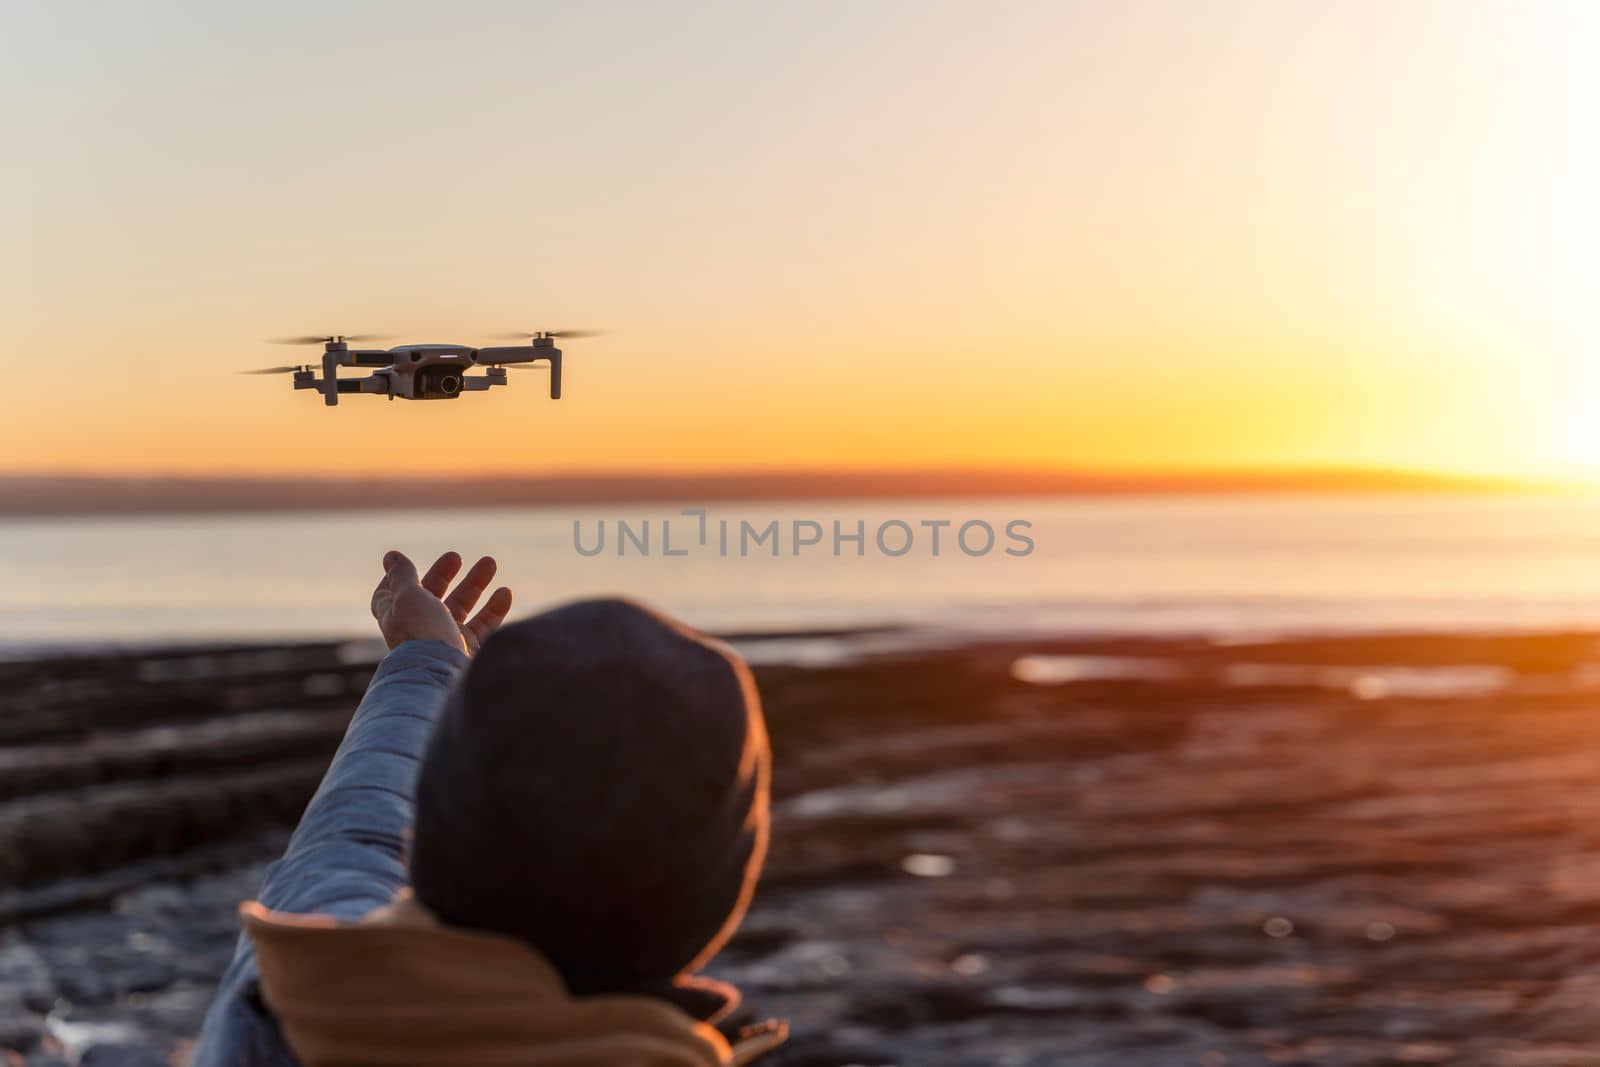 Bearded man using a drone with remote controller making photos and videos, having fun with new technology trends by Iryna_Melnyk